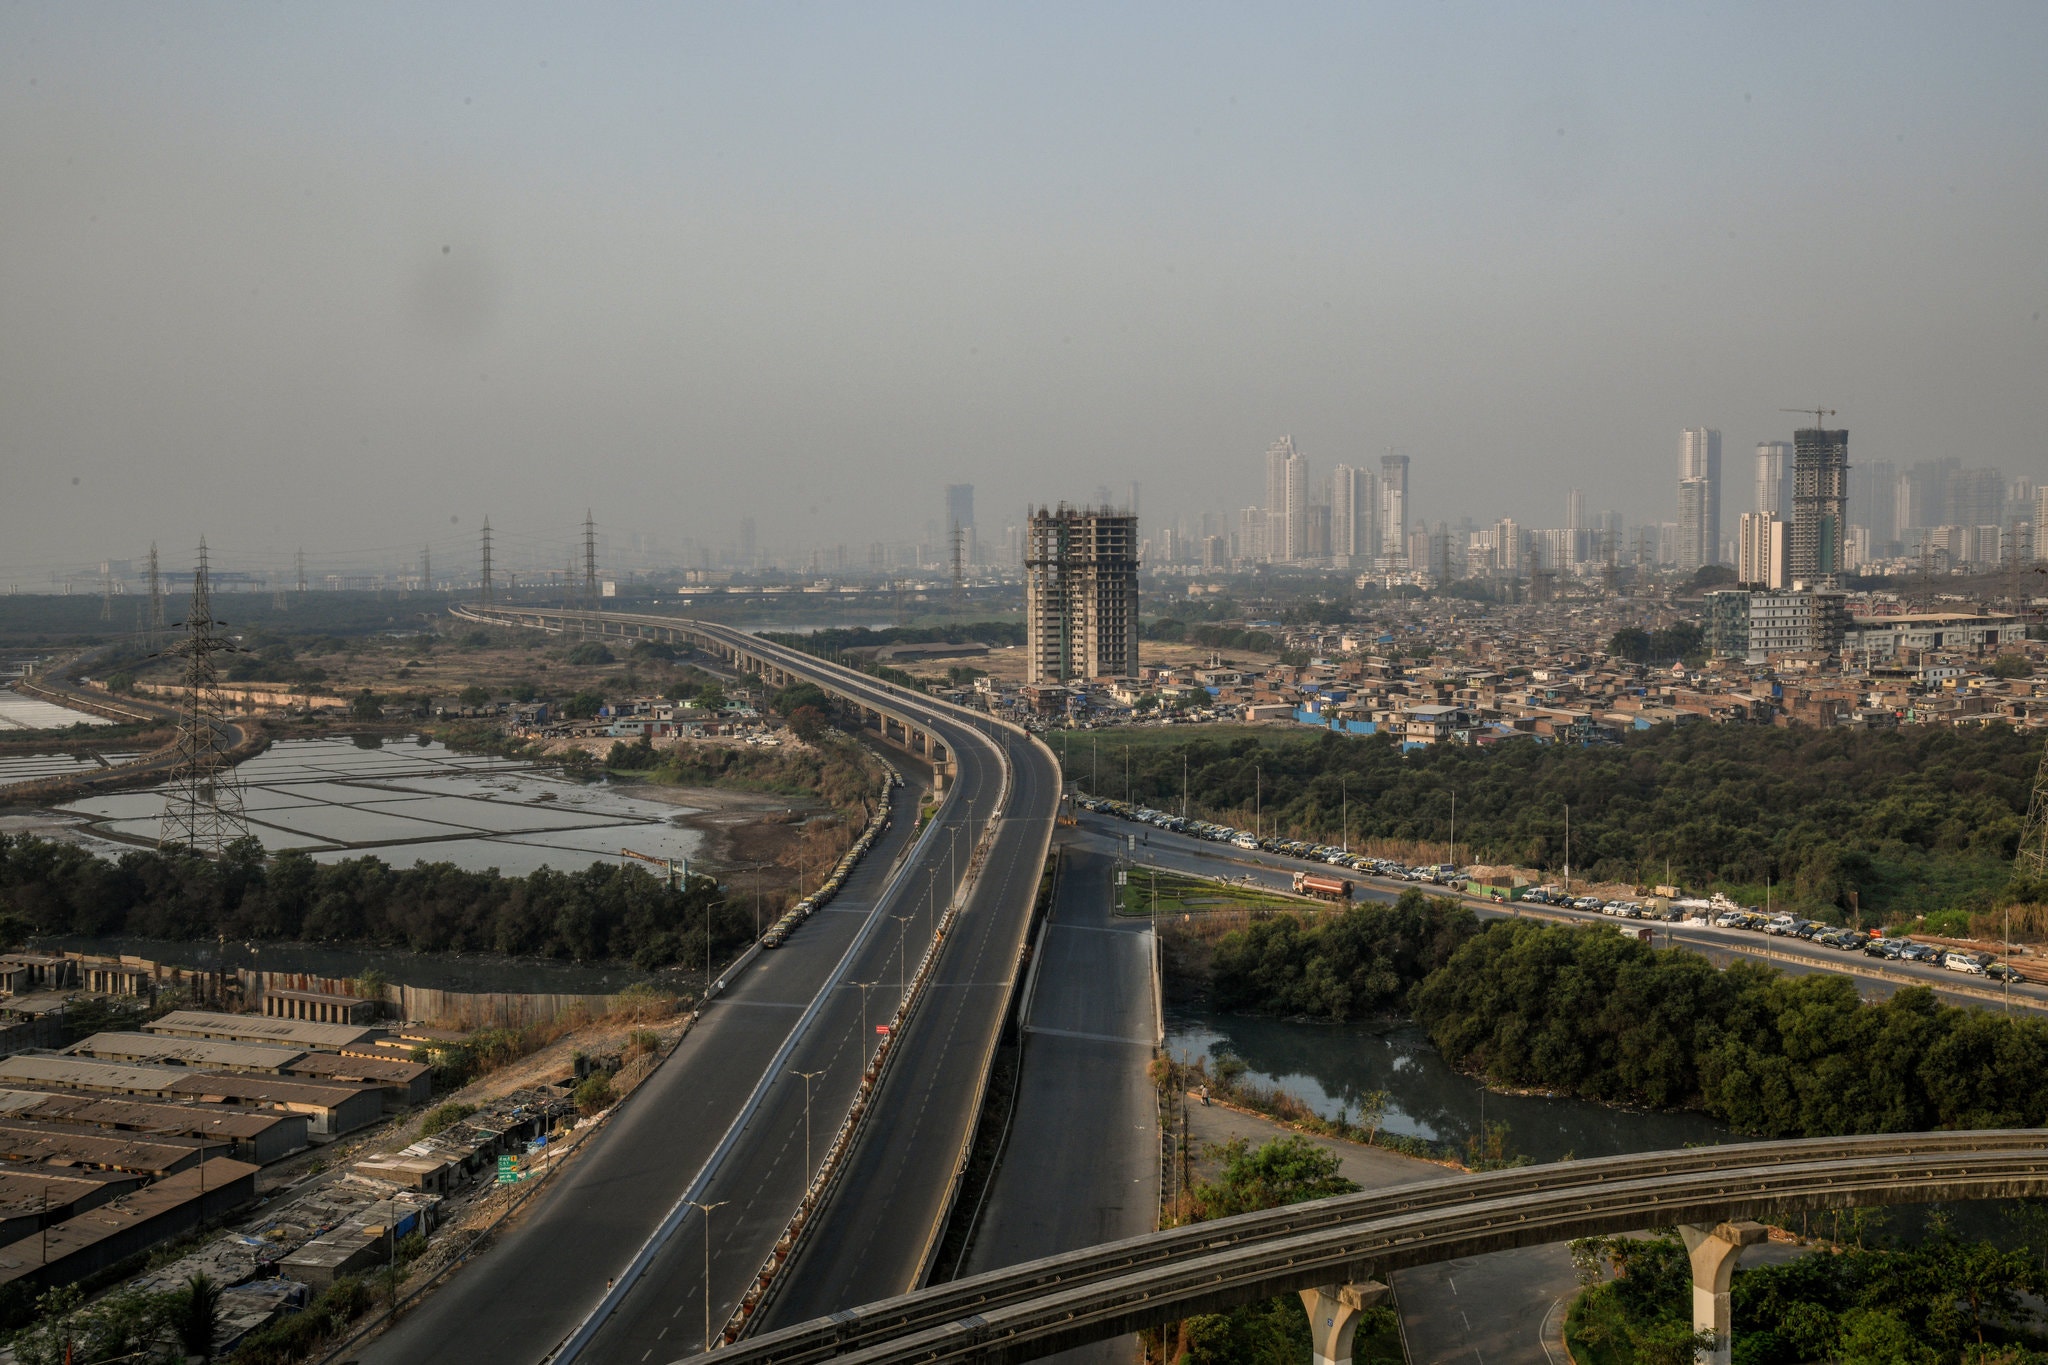 Aerial view of the eastern expressway in Mumbai after Prime Minister Narendra Modi imposed a nationwide lockdown on 24 March 2020 in an attempt to slow the spread of the coronavirus. Photo: Atul Loke / The New York Times